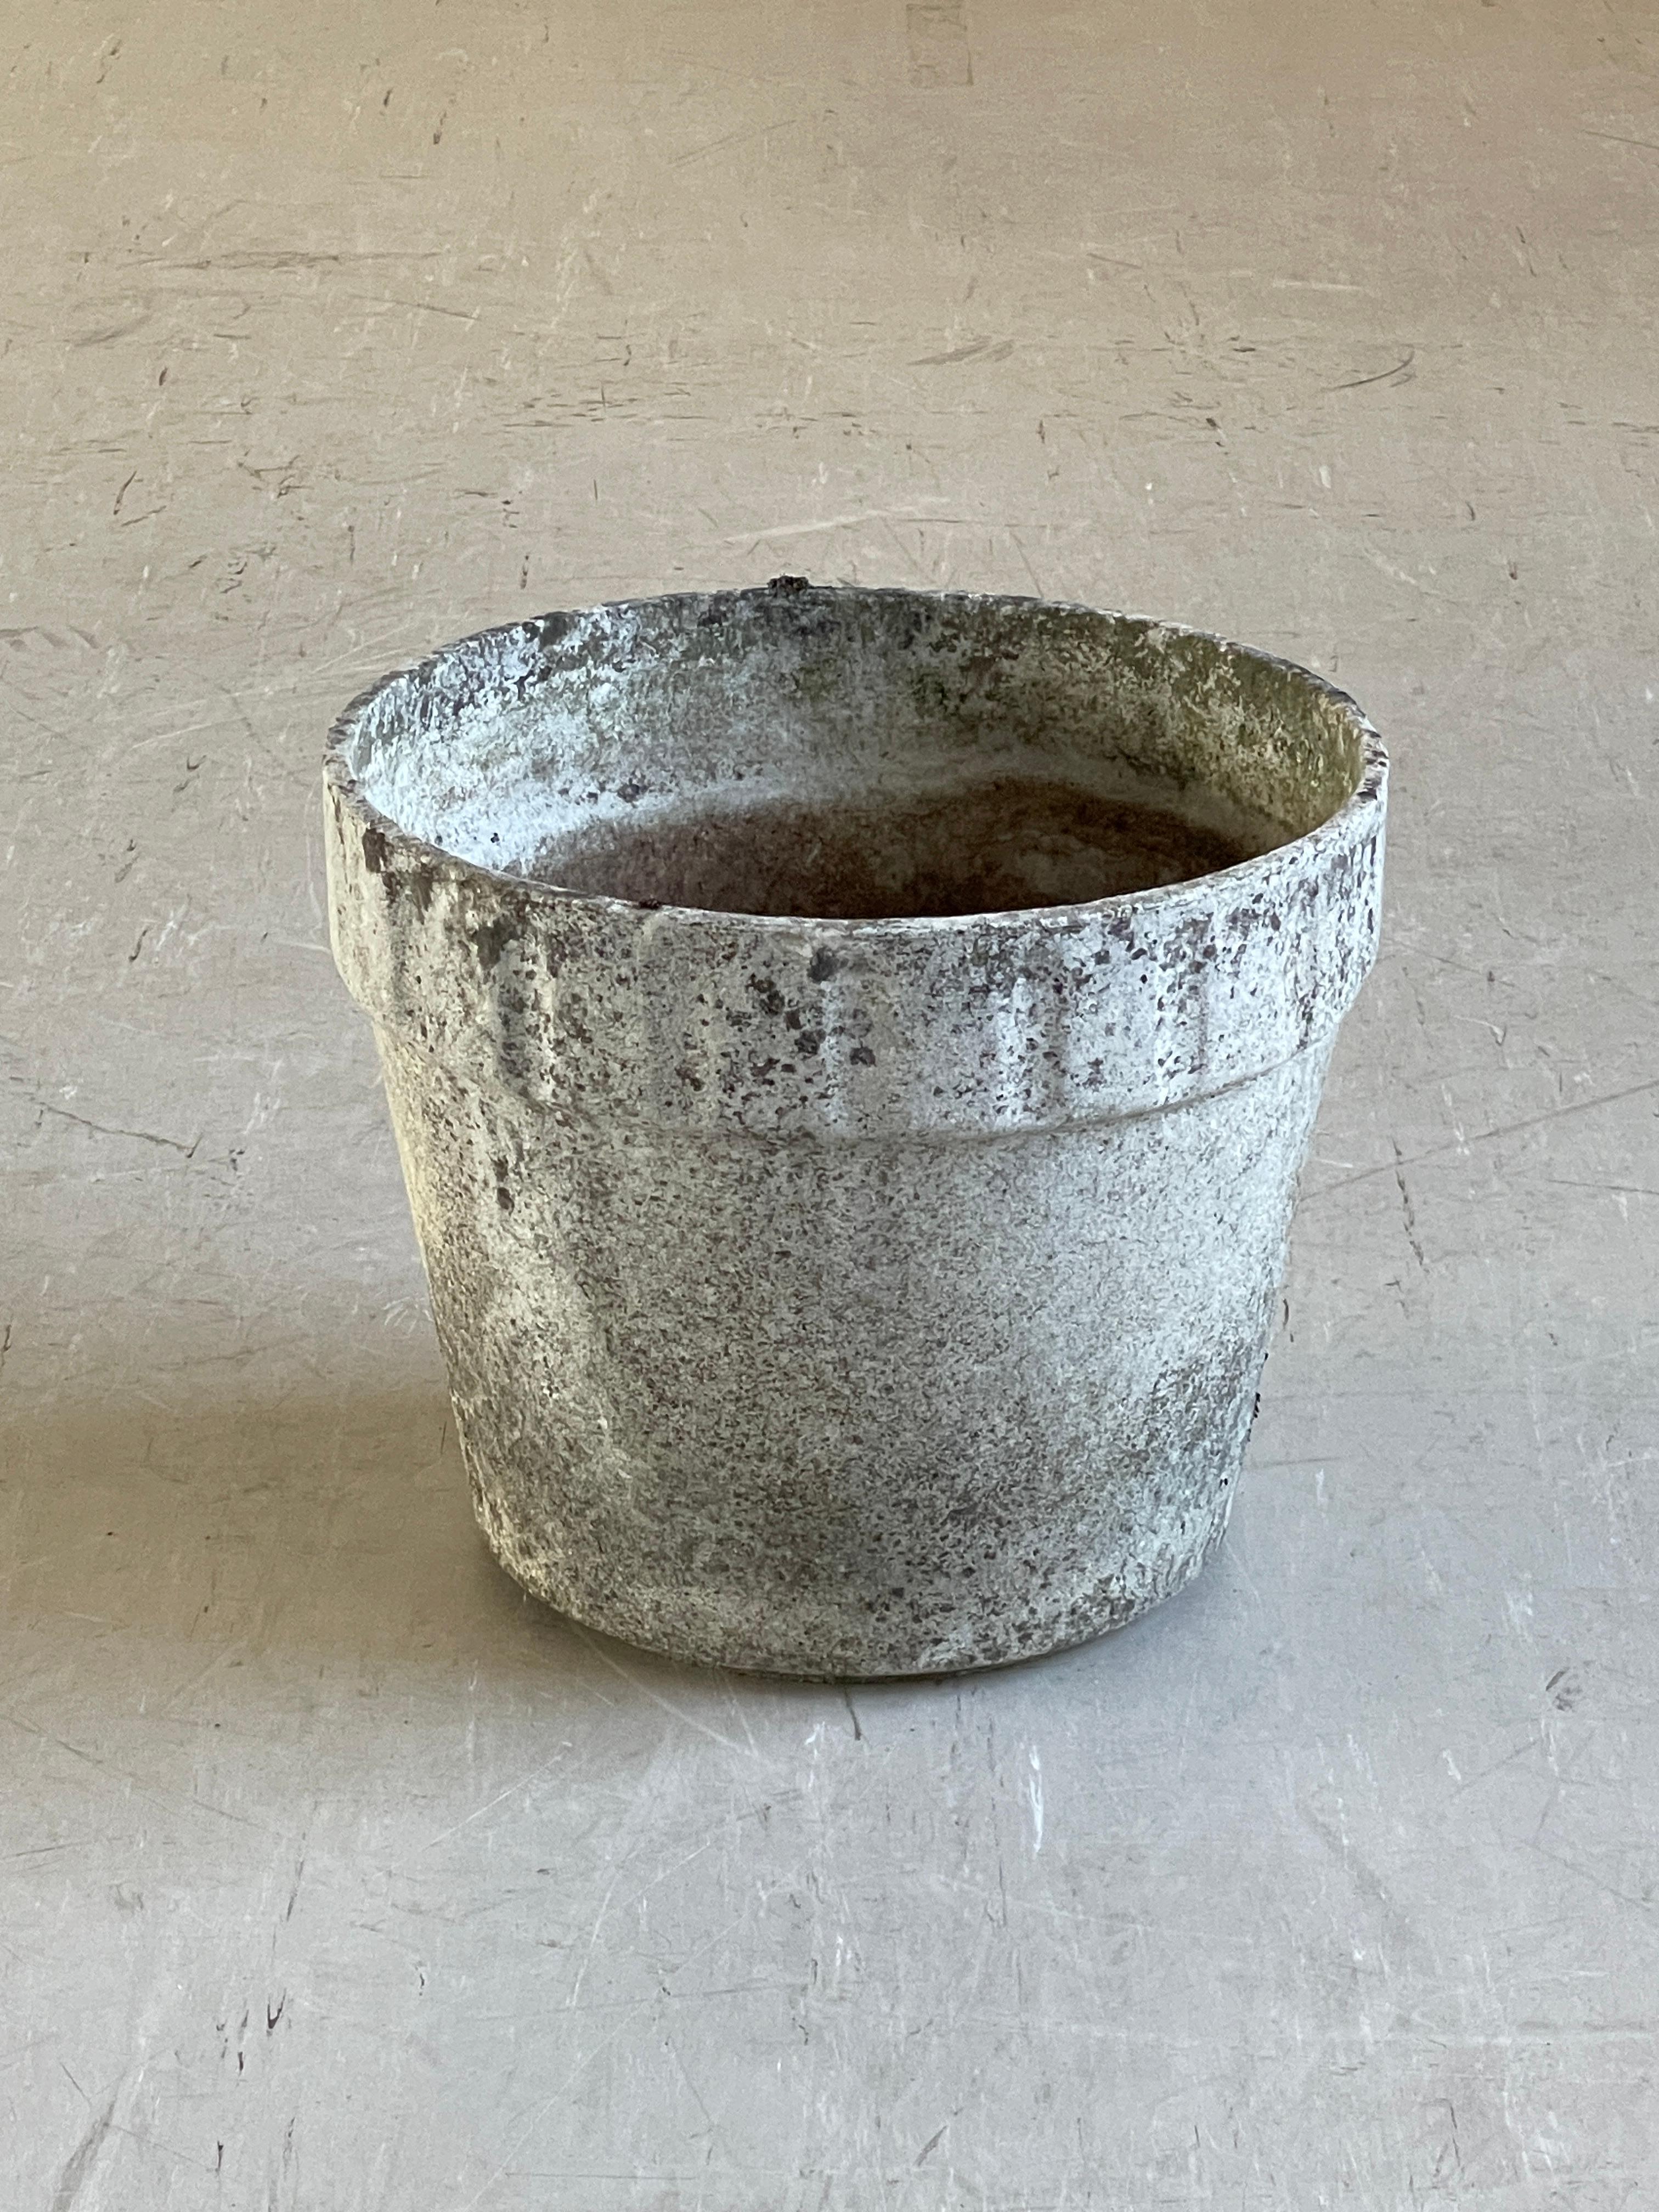 Monumental concrete flower pot by Swiss designer, Willy Guhl. Solid concrete made in Switzerland 1960 - 1970. Produced by Eternit AG.  Tapered structure with a ribbed upper section with factory drilled drainage holes. In original condition with